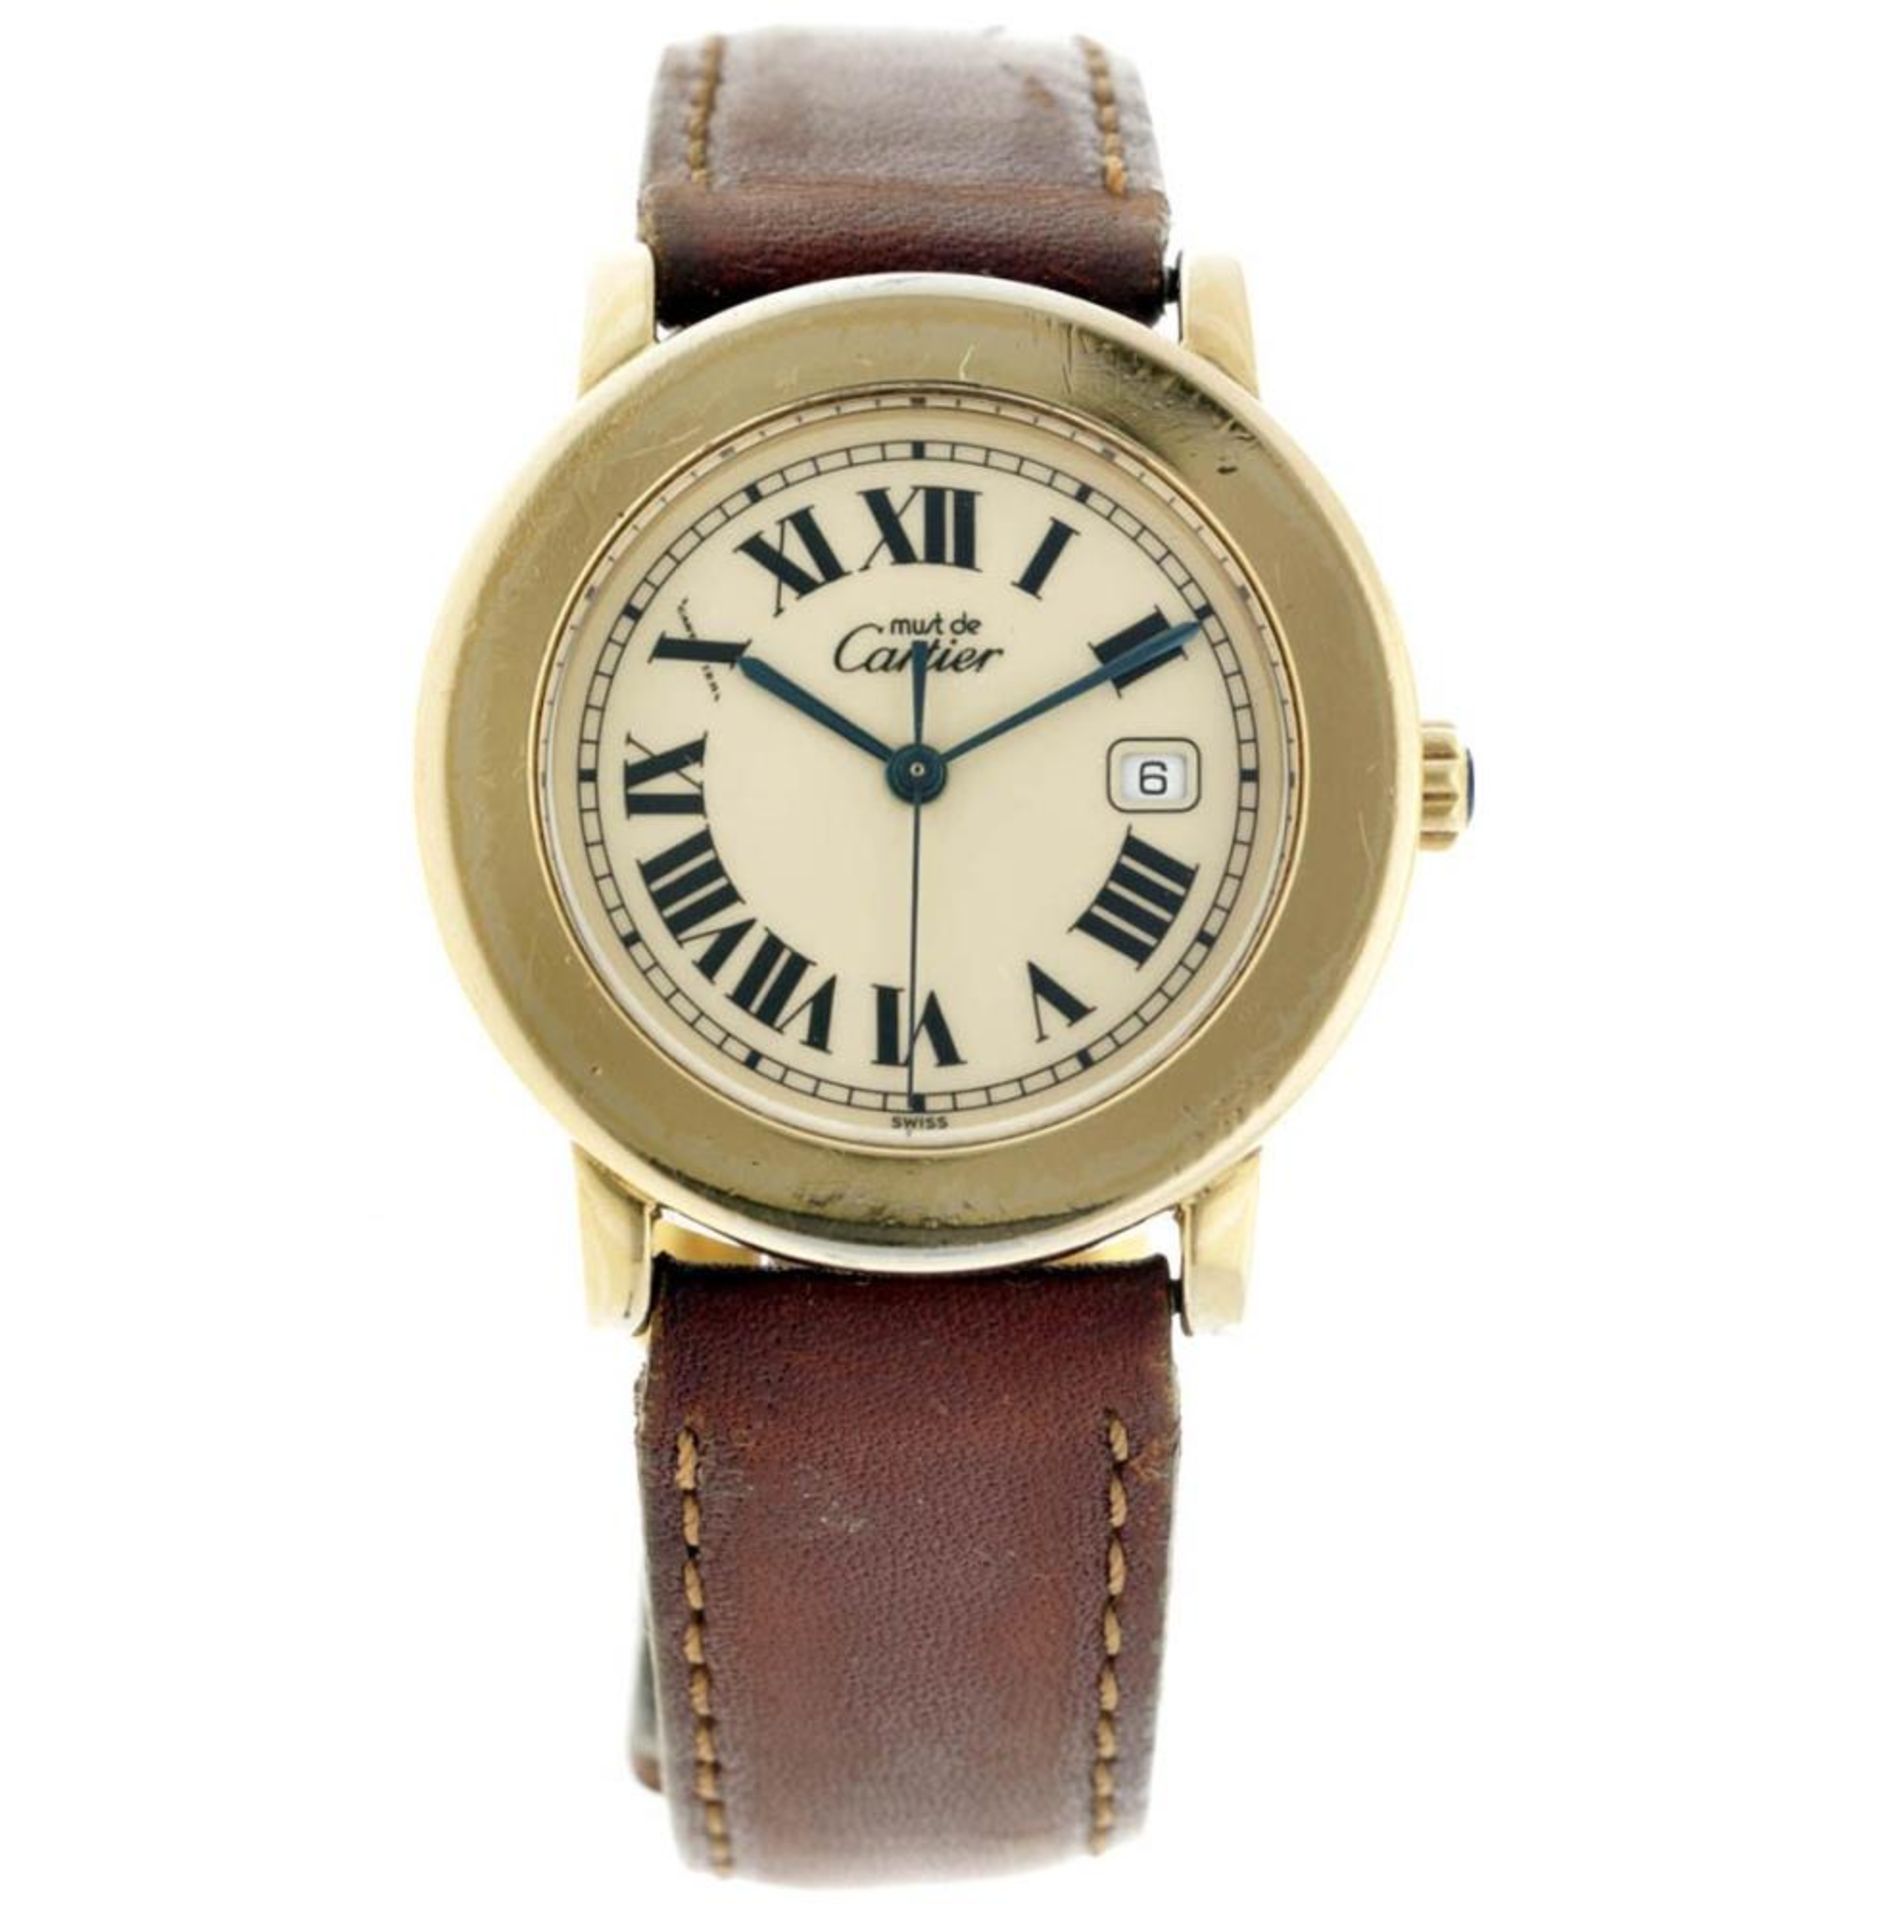 Cartier Ronde 1800.1 - Ladies watch - approx. 1995.